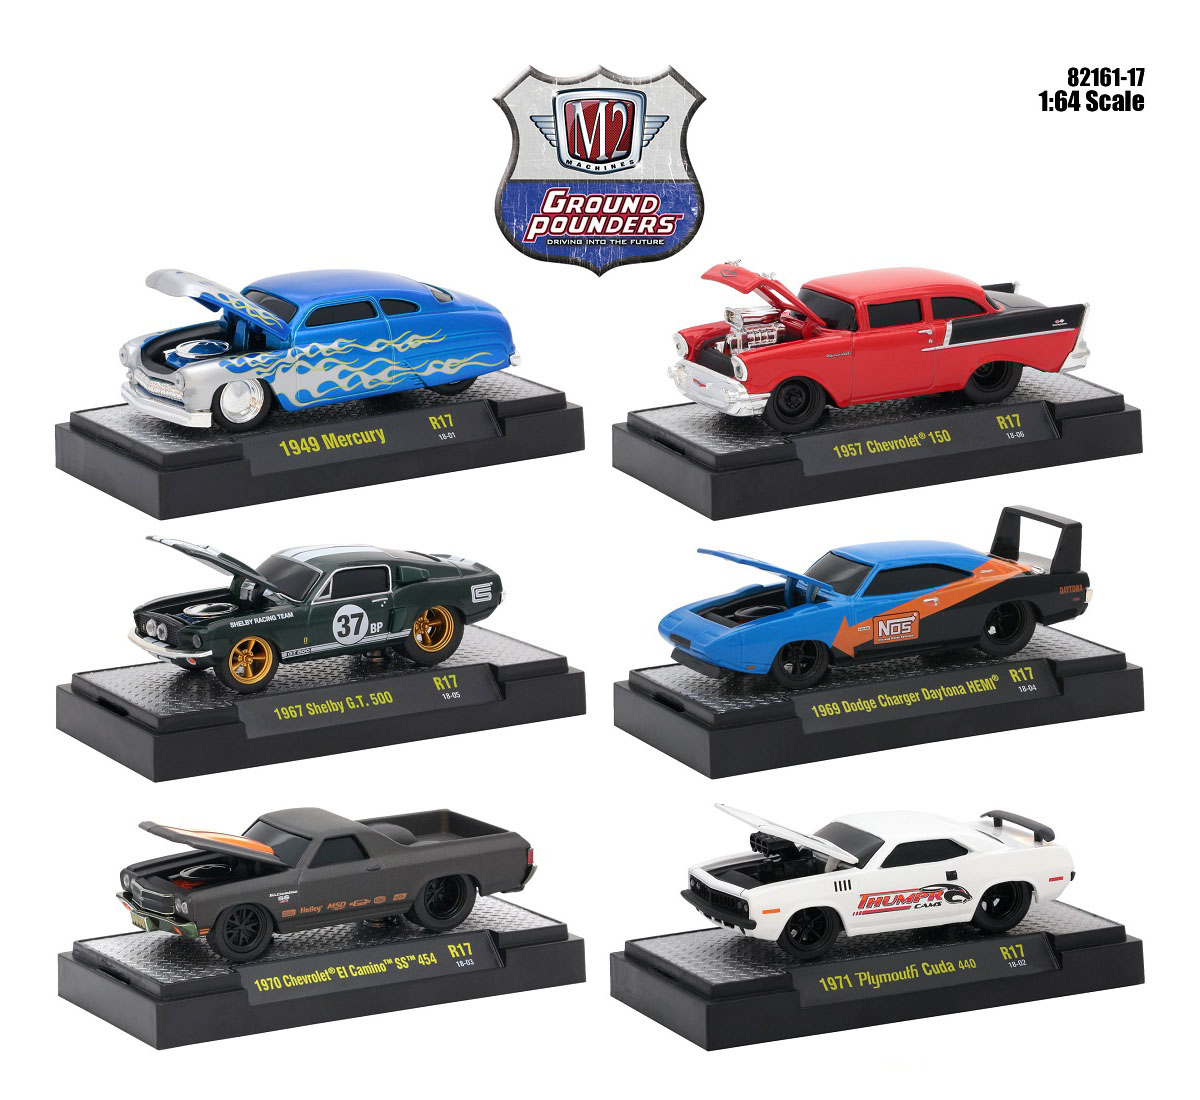 Ground Pounders 6 Cars Set Release 17 In Display Cases 1/64 Diecast Model Cars By M2 Machines